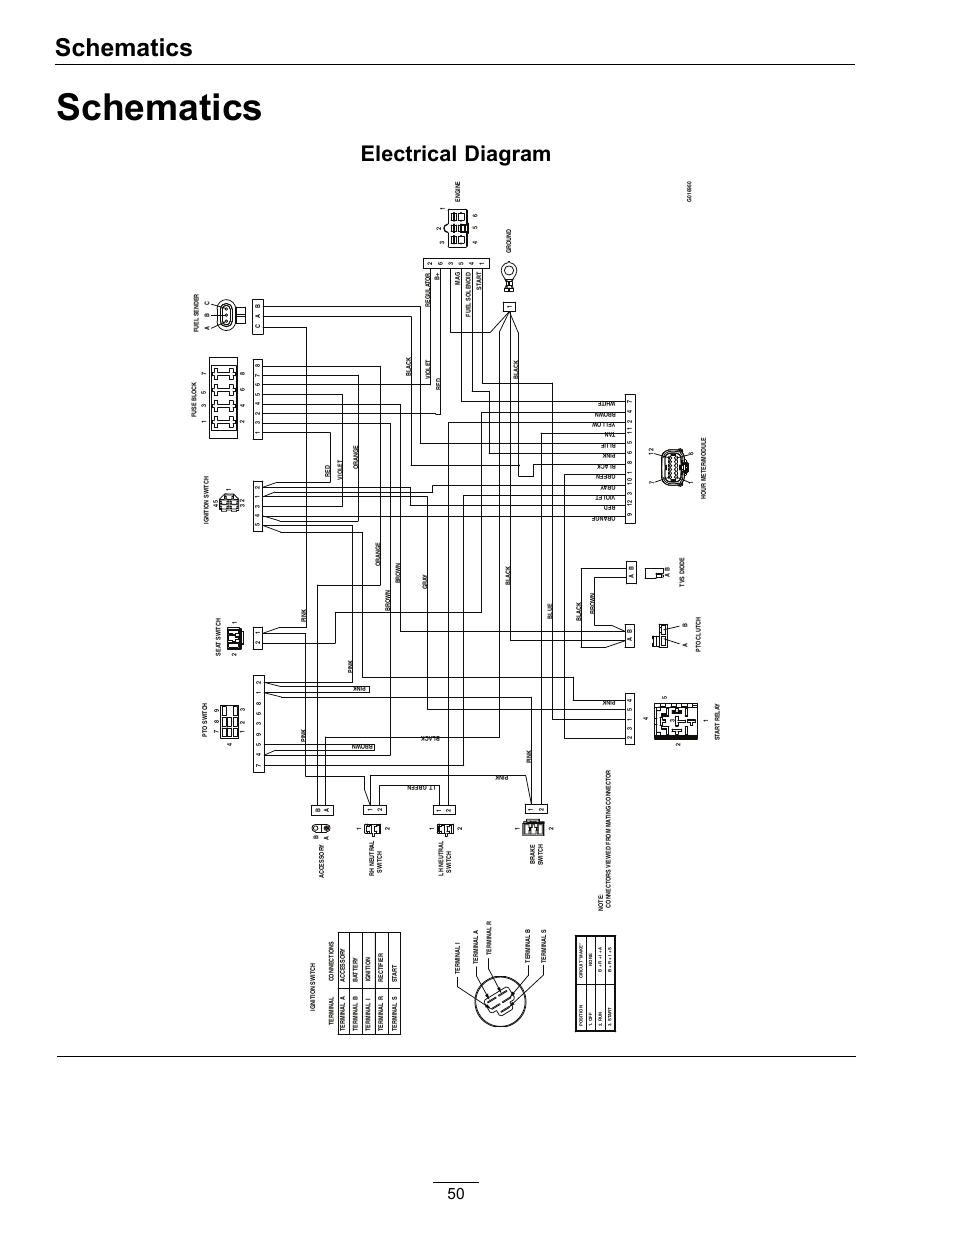 honda d17 ignition coil wiring diagram